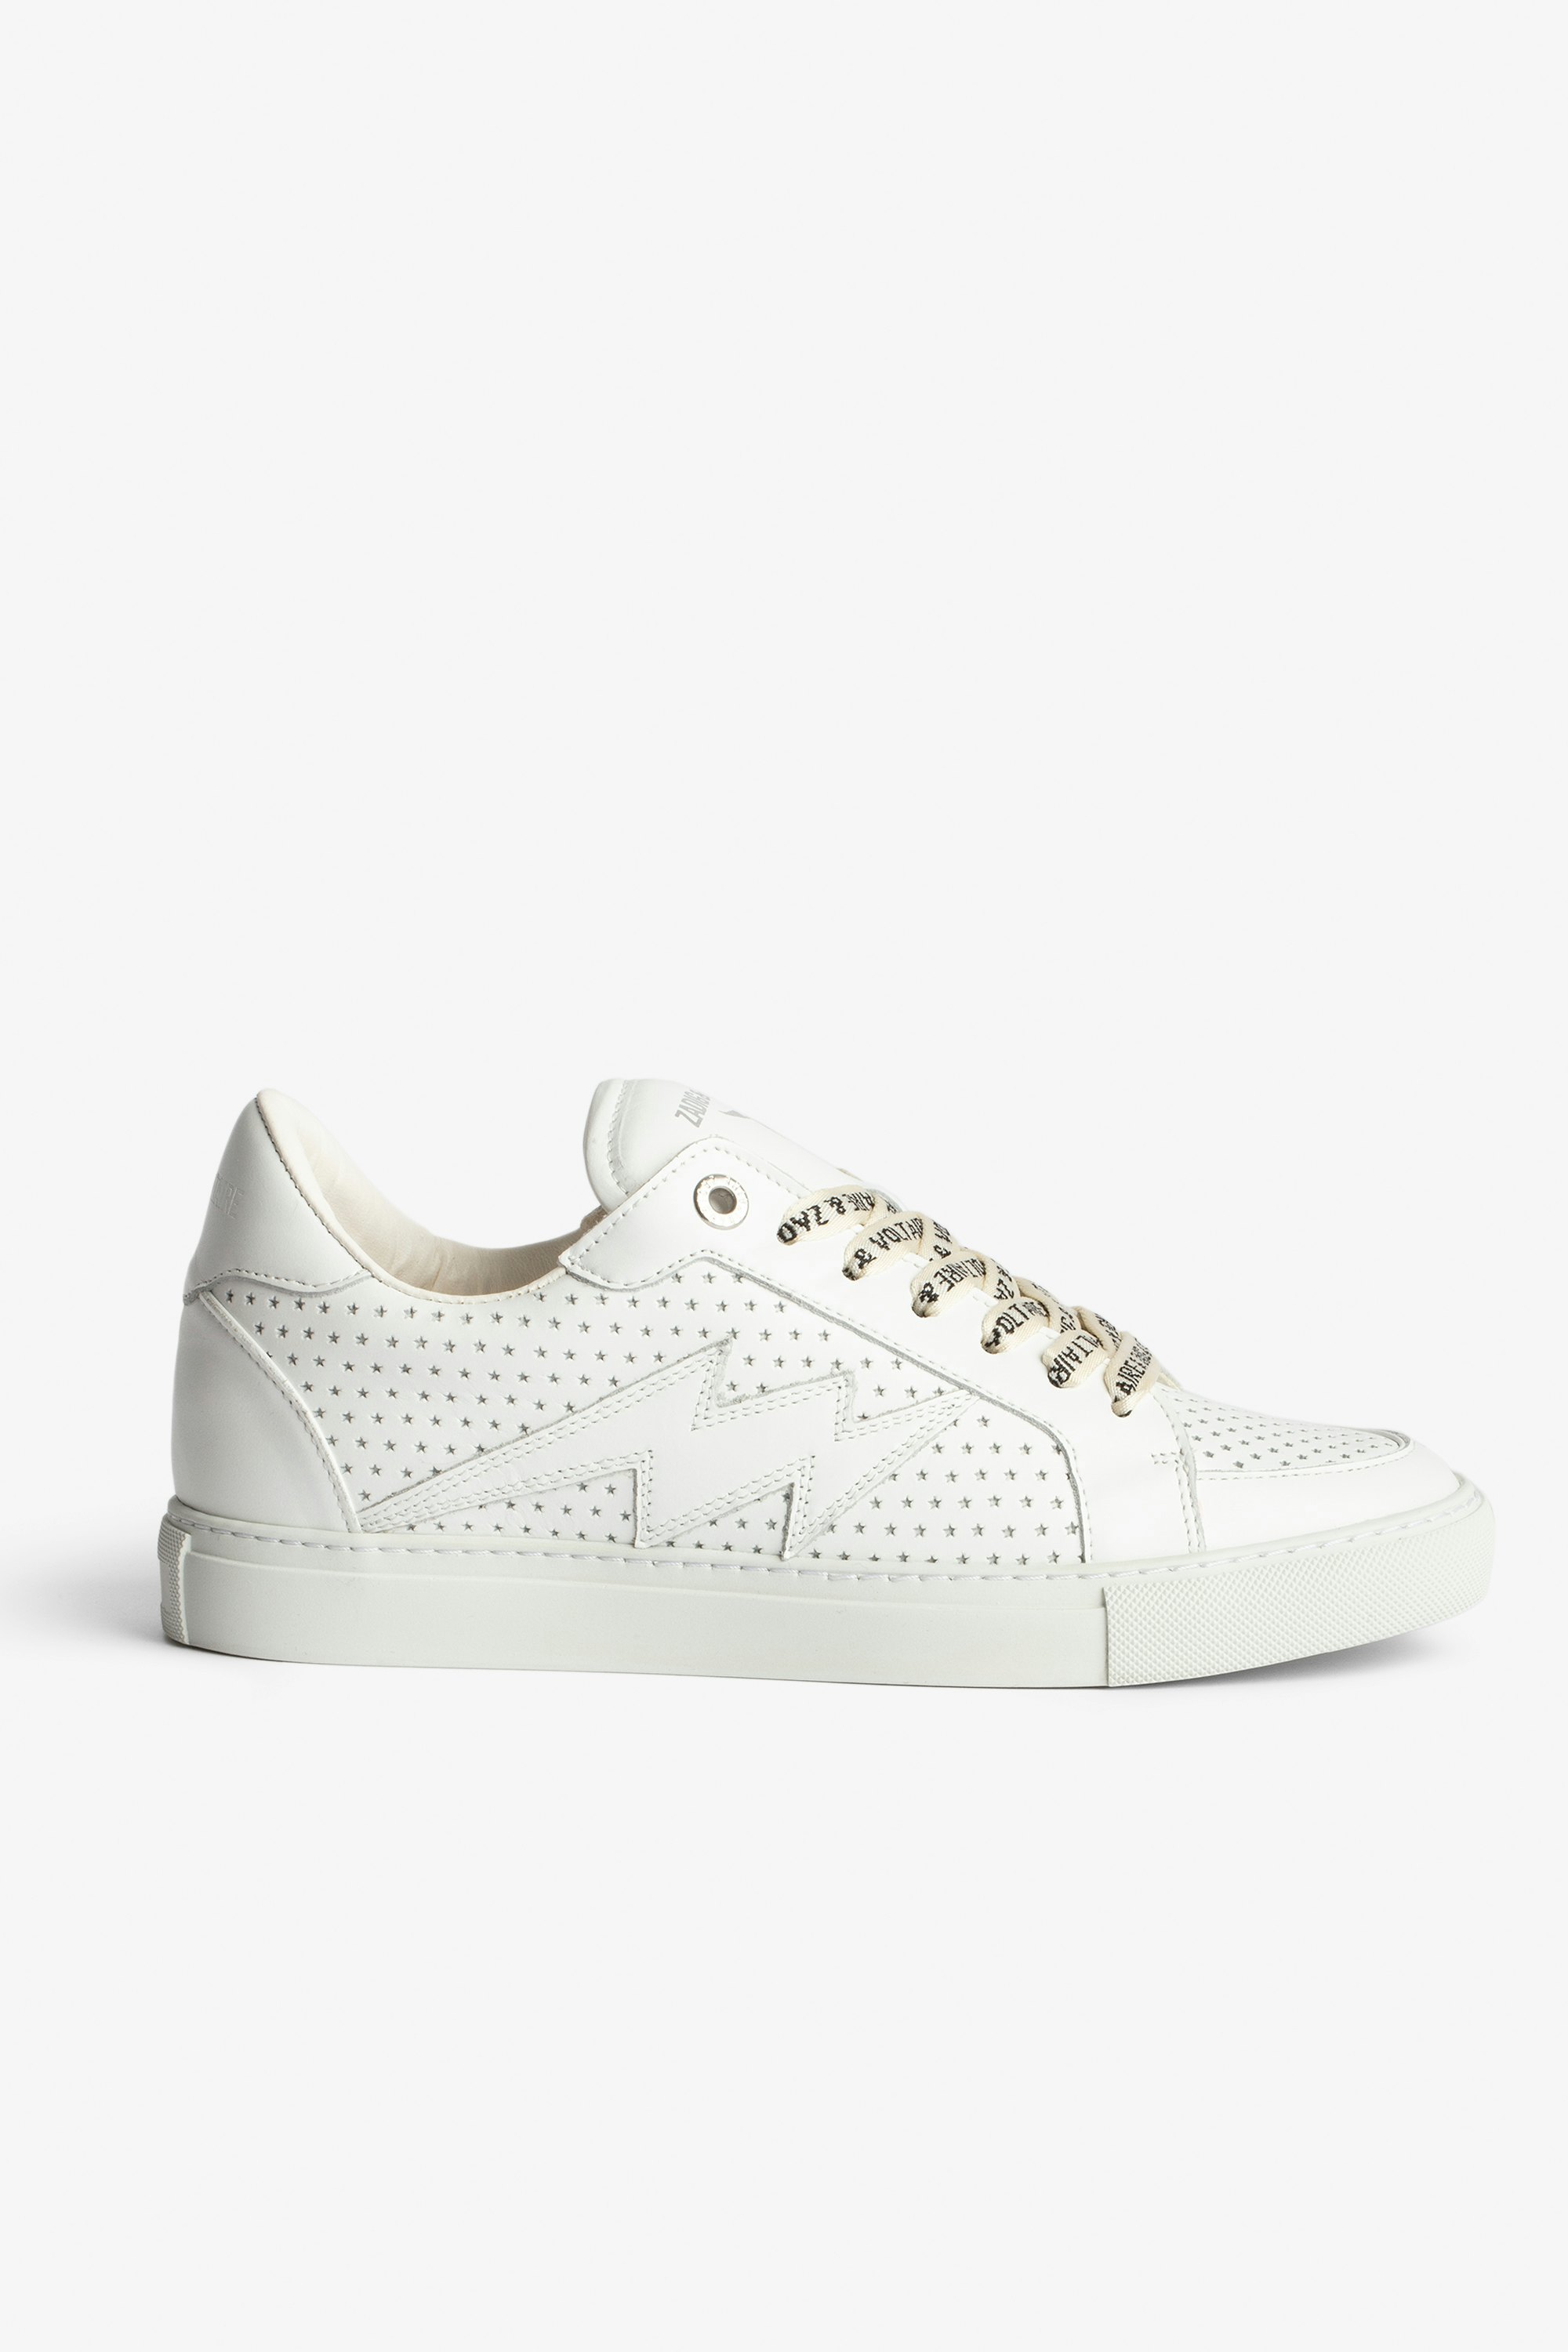 La Flash Trainers Women's low-top trainers in smooth white leather with perforated stars